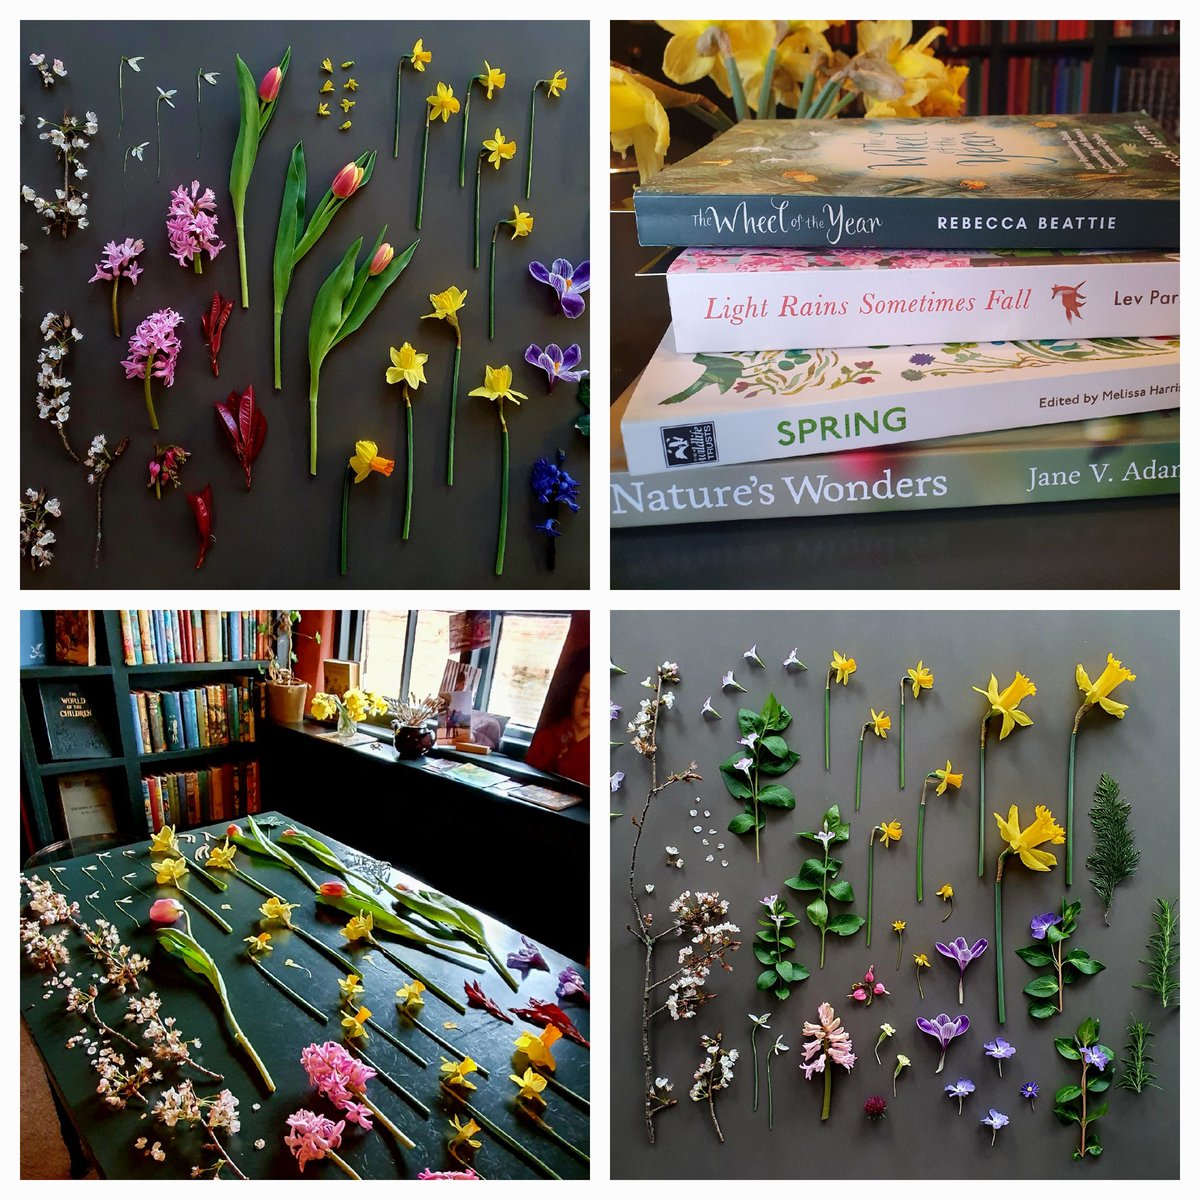 A lovely Spring Surprises nature writing workshop today at @BooksAlbans - inspiration from authors including @LevParikian @M_Z_Harrison @robbiecowen @rebecca_beattie & @WildlifeStuff 💚